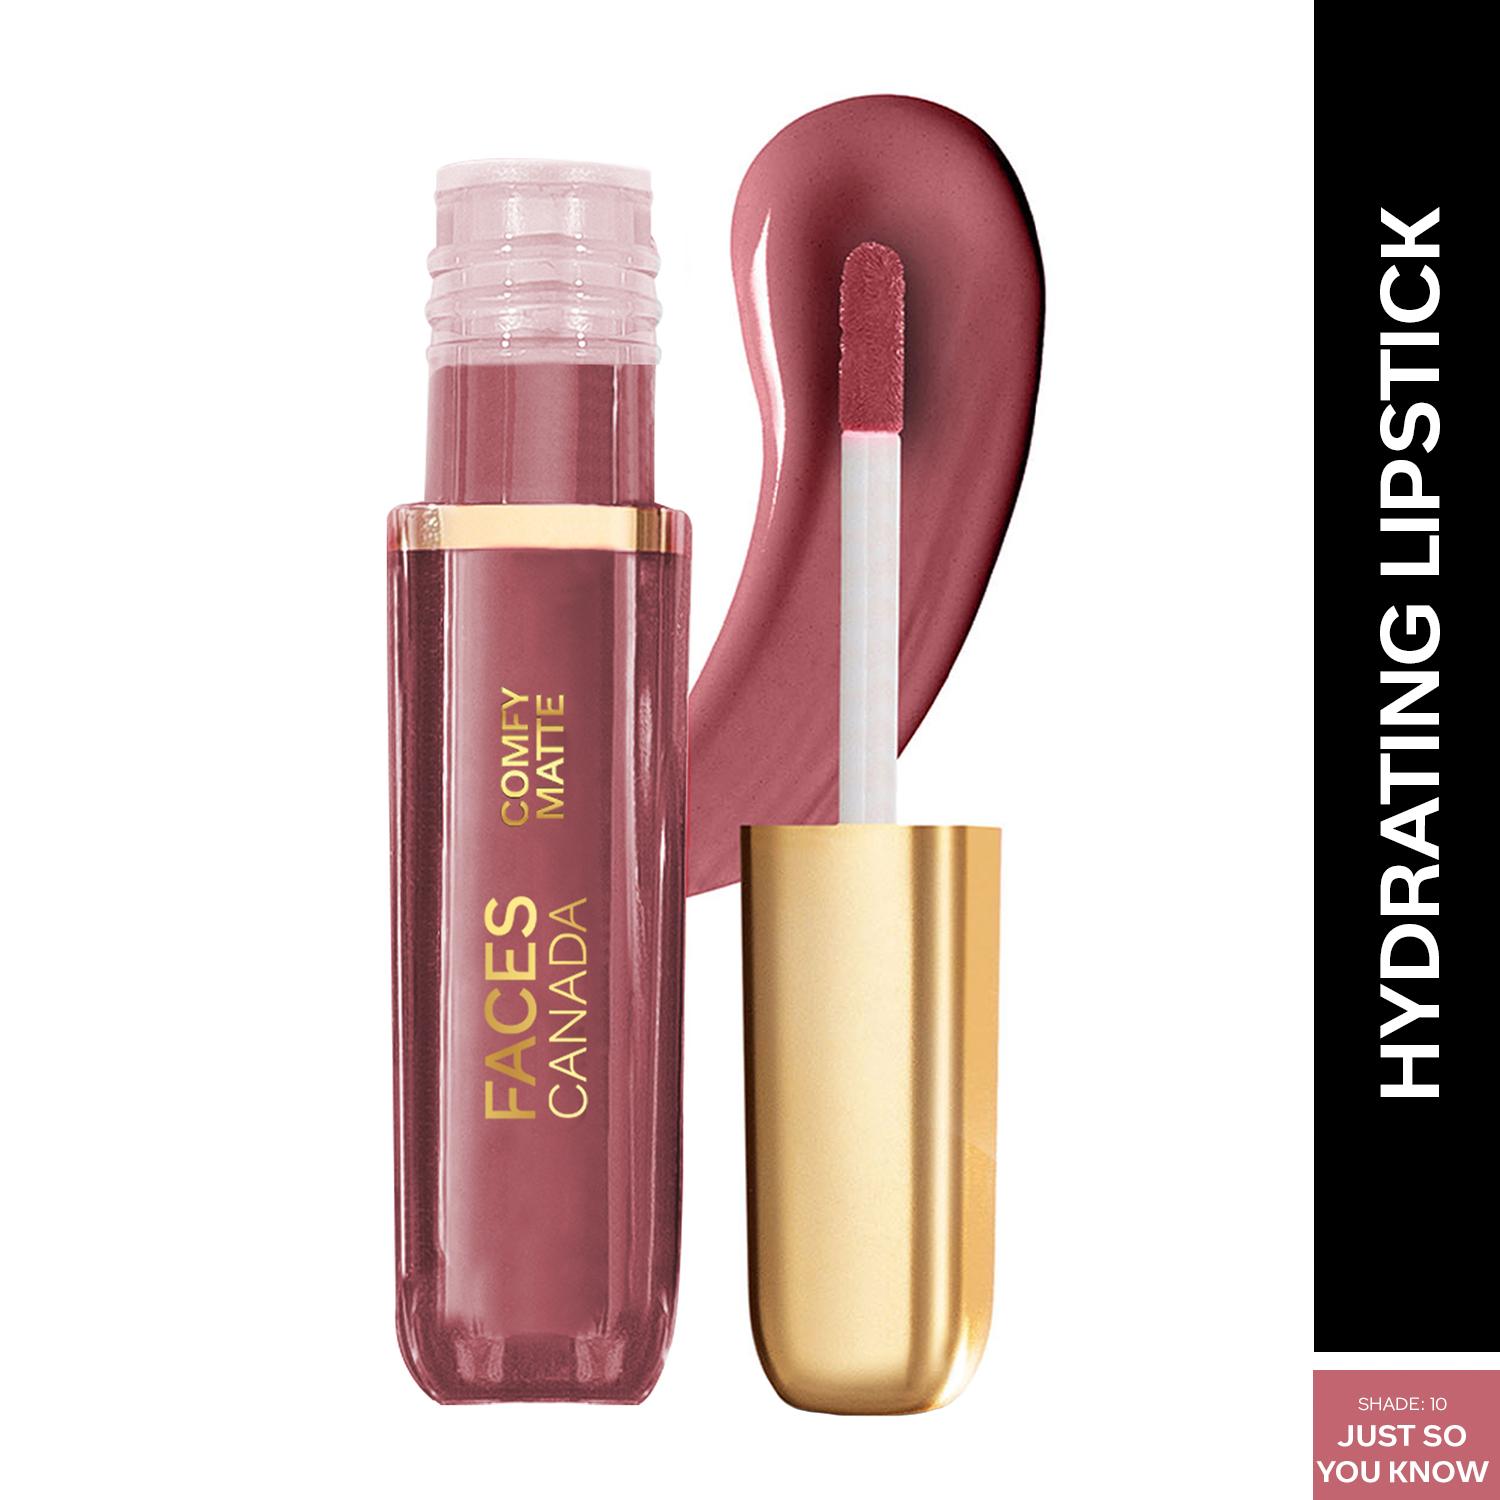 Faces Canada | Faces Canada Comfy Matte Liquid Lipstick, 10HR Stay, No Dryness - Just So You Know 10 (3 ml)